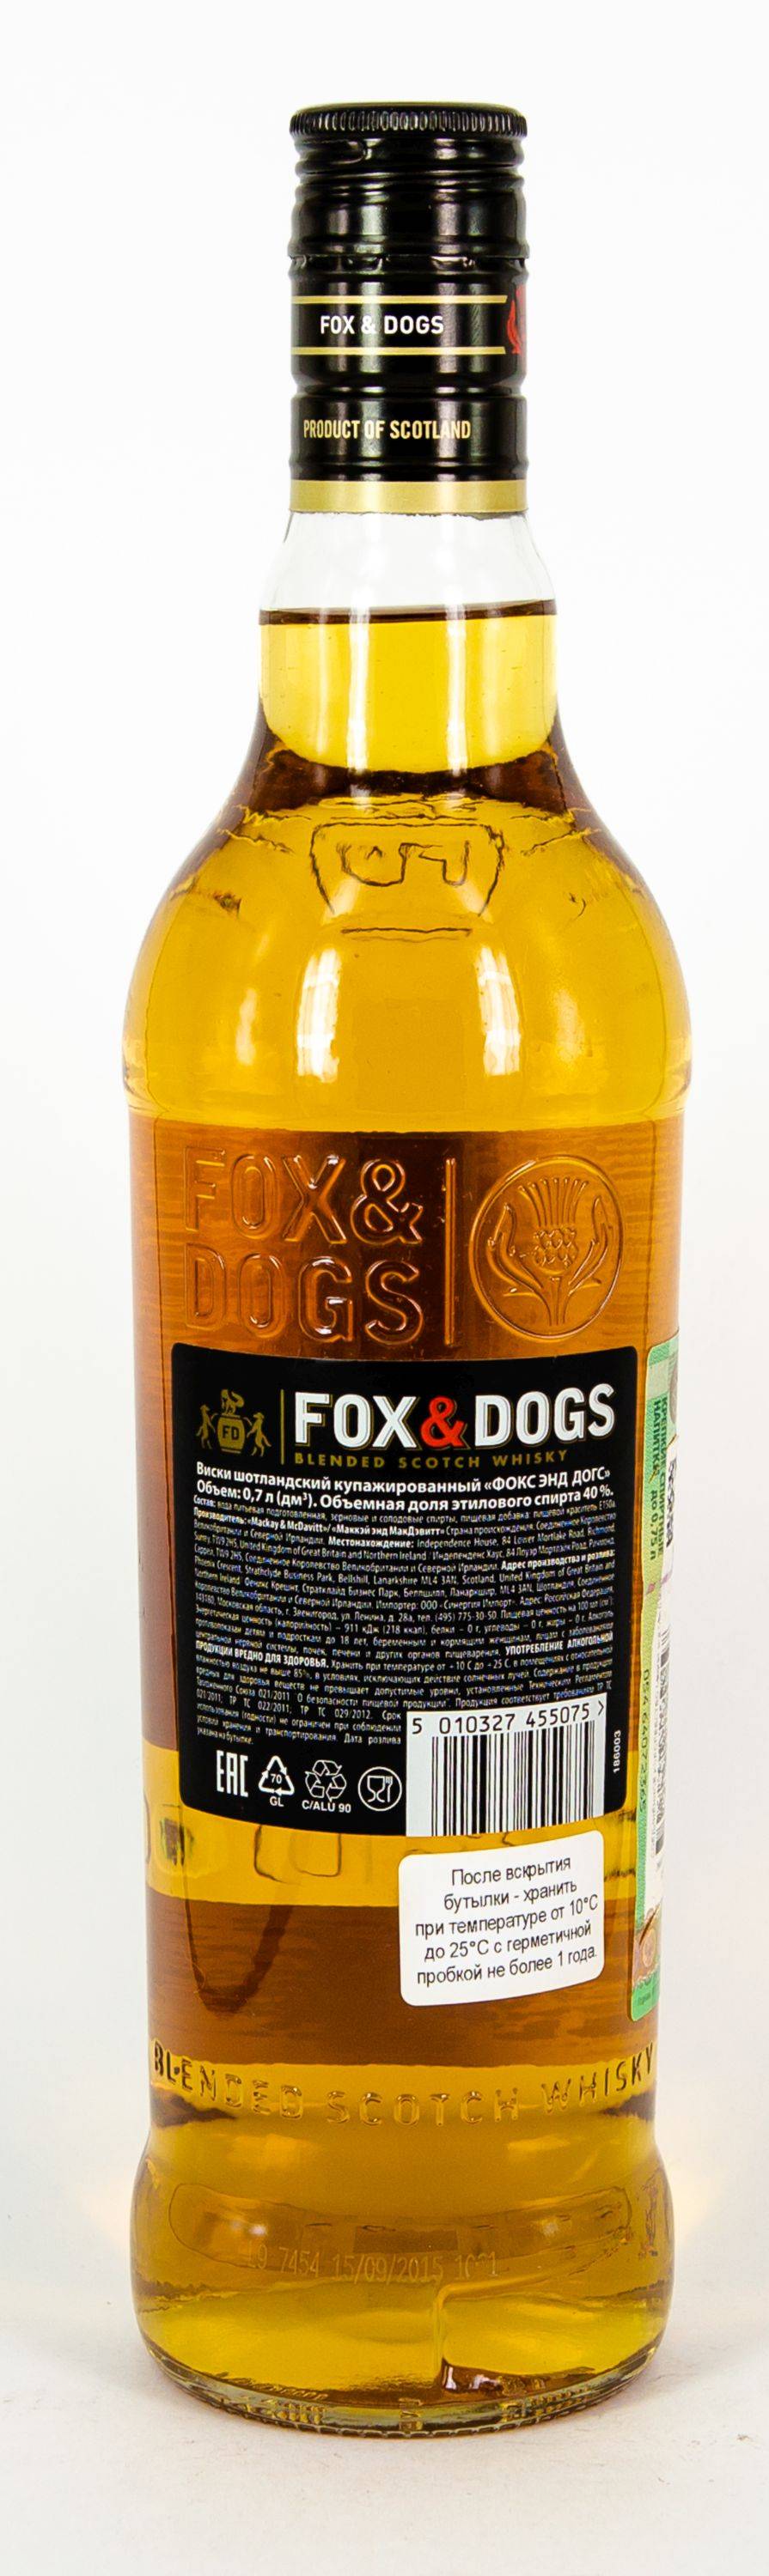 Fox and dogs отзывы. Виски Фокс энд догс 0.7. Виски Fox&Dogs, 0.7 л. Виски Fox Dogs 0.5. Фокс догс виски 0.25.